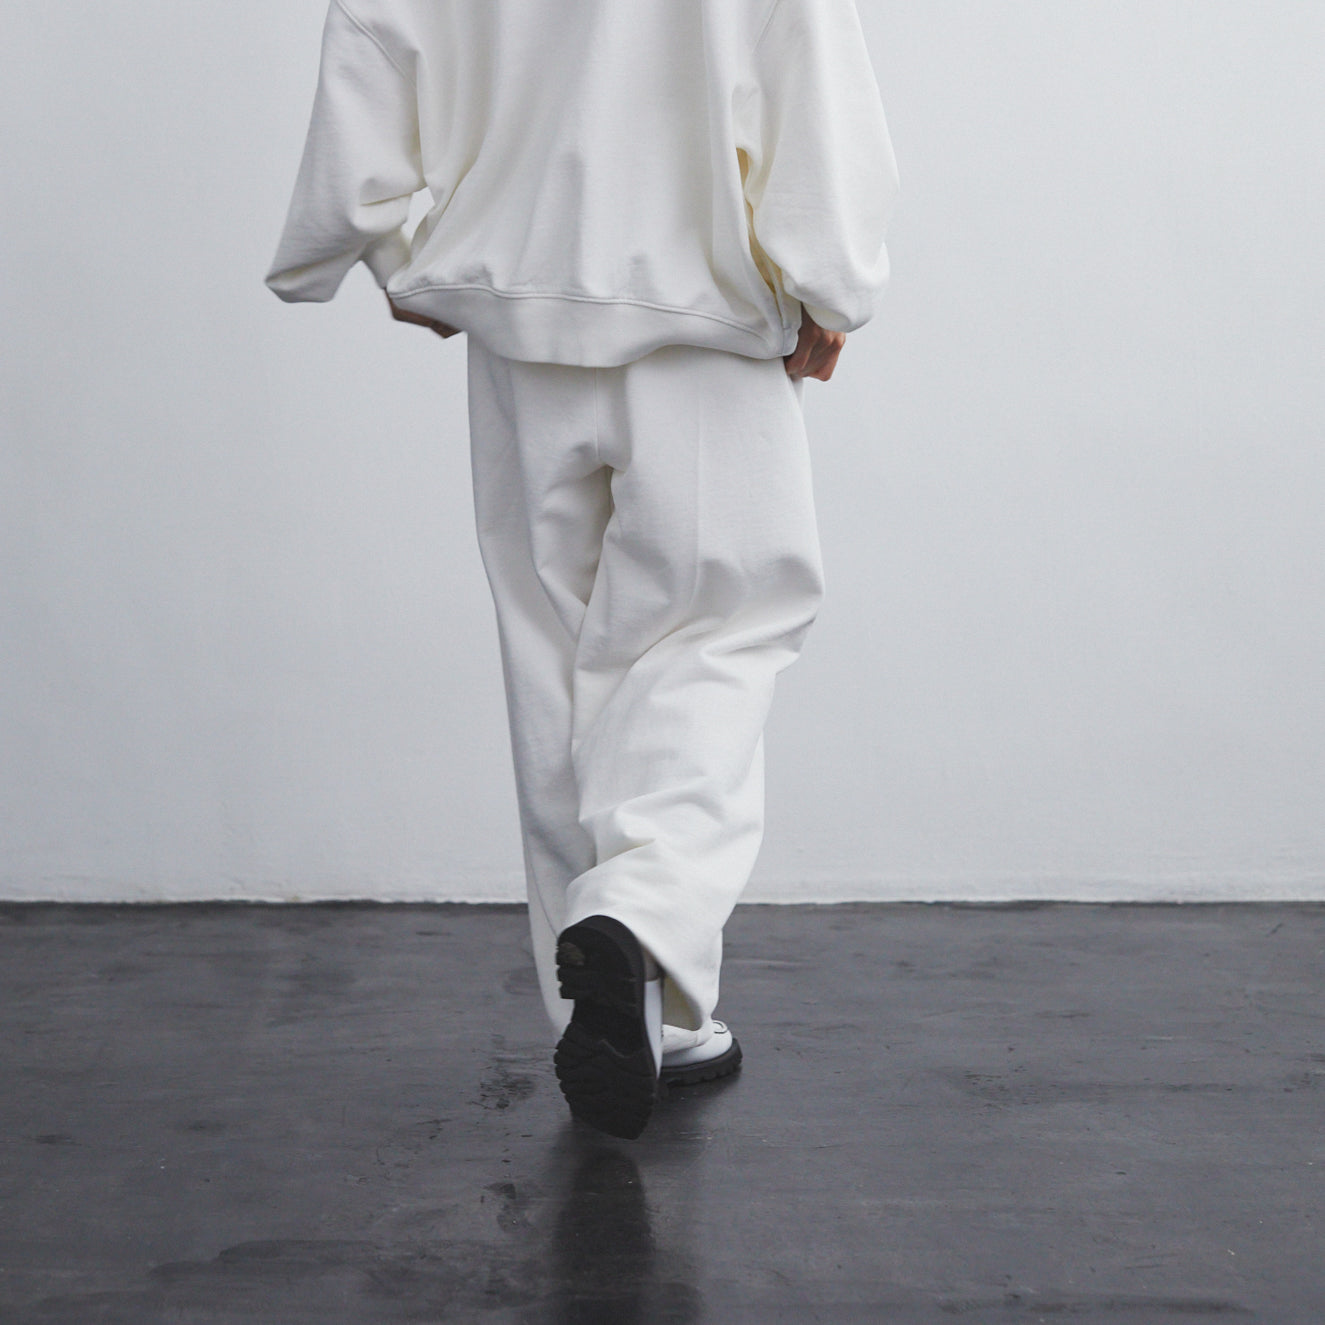 WILLY CHAVARRIA / BASIC SWEAT PANTS BRIGHT WHITE